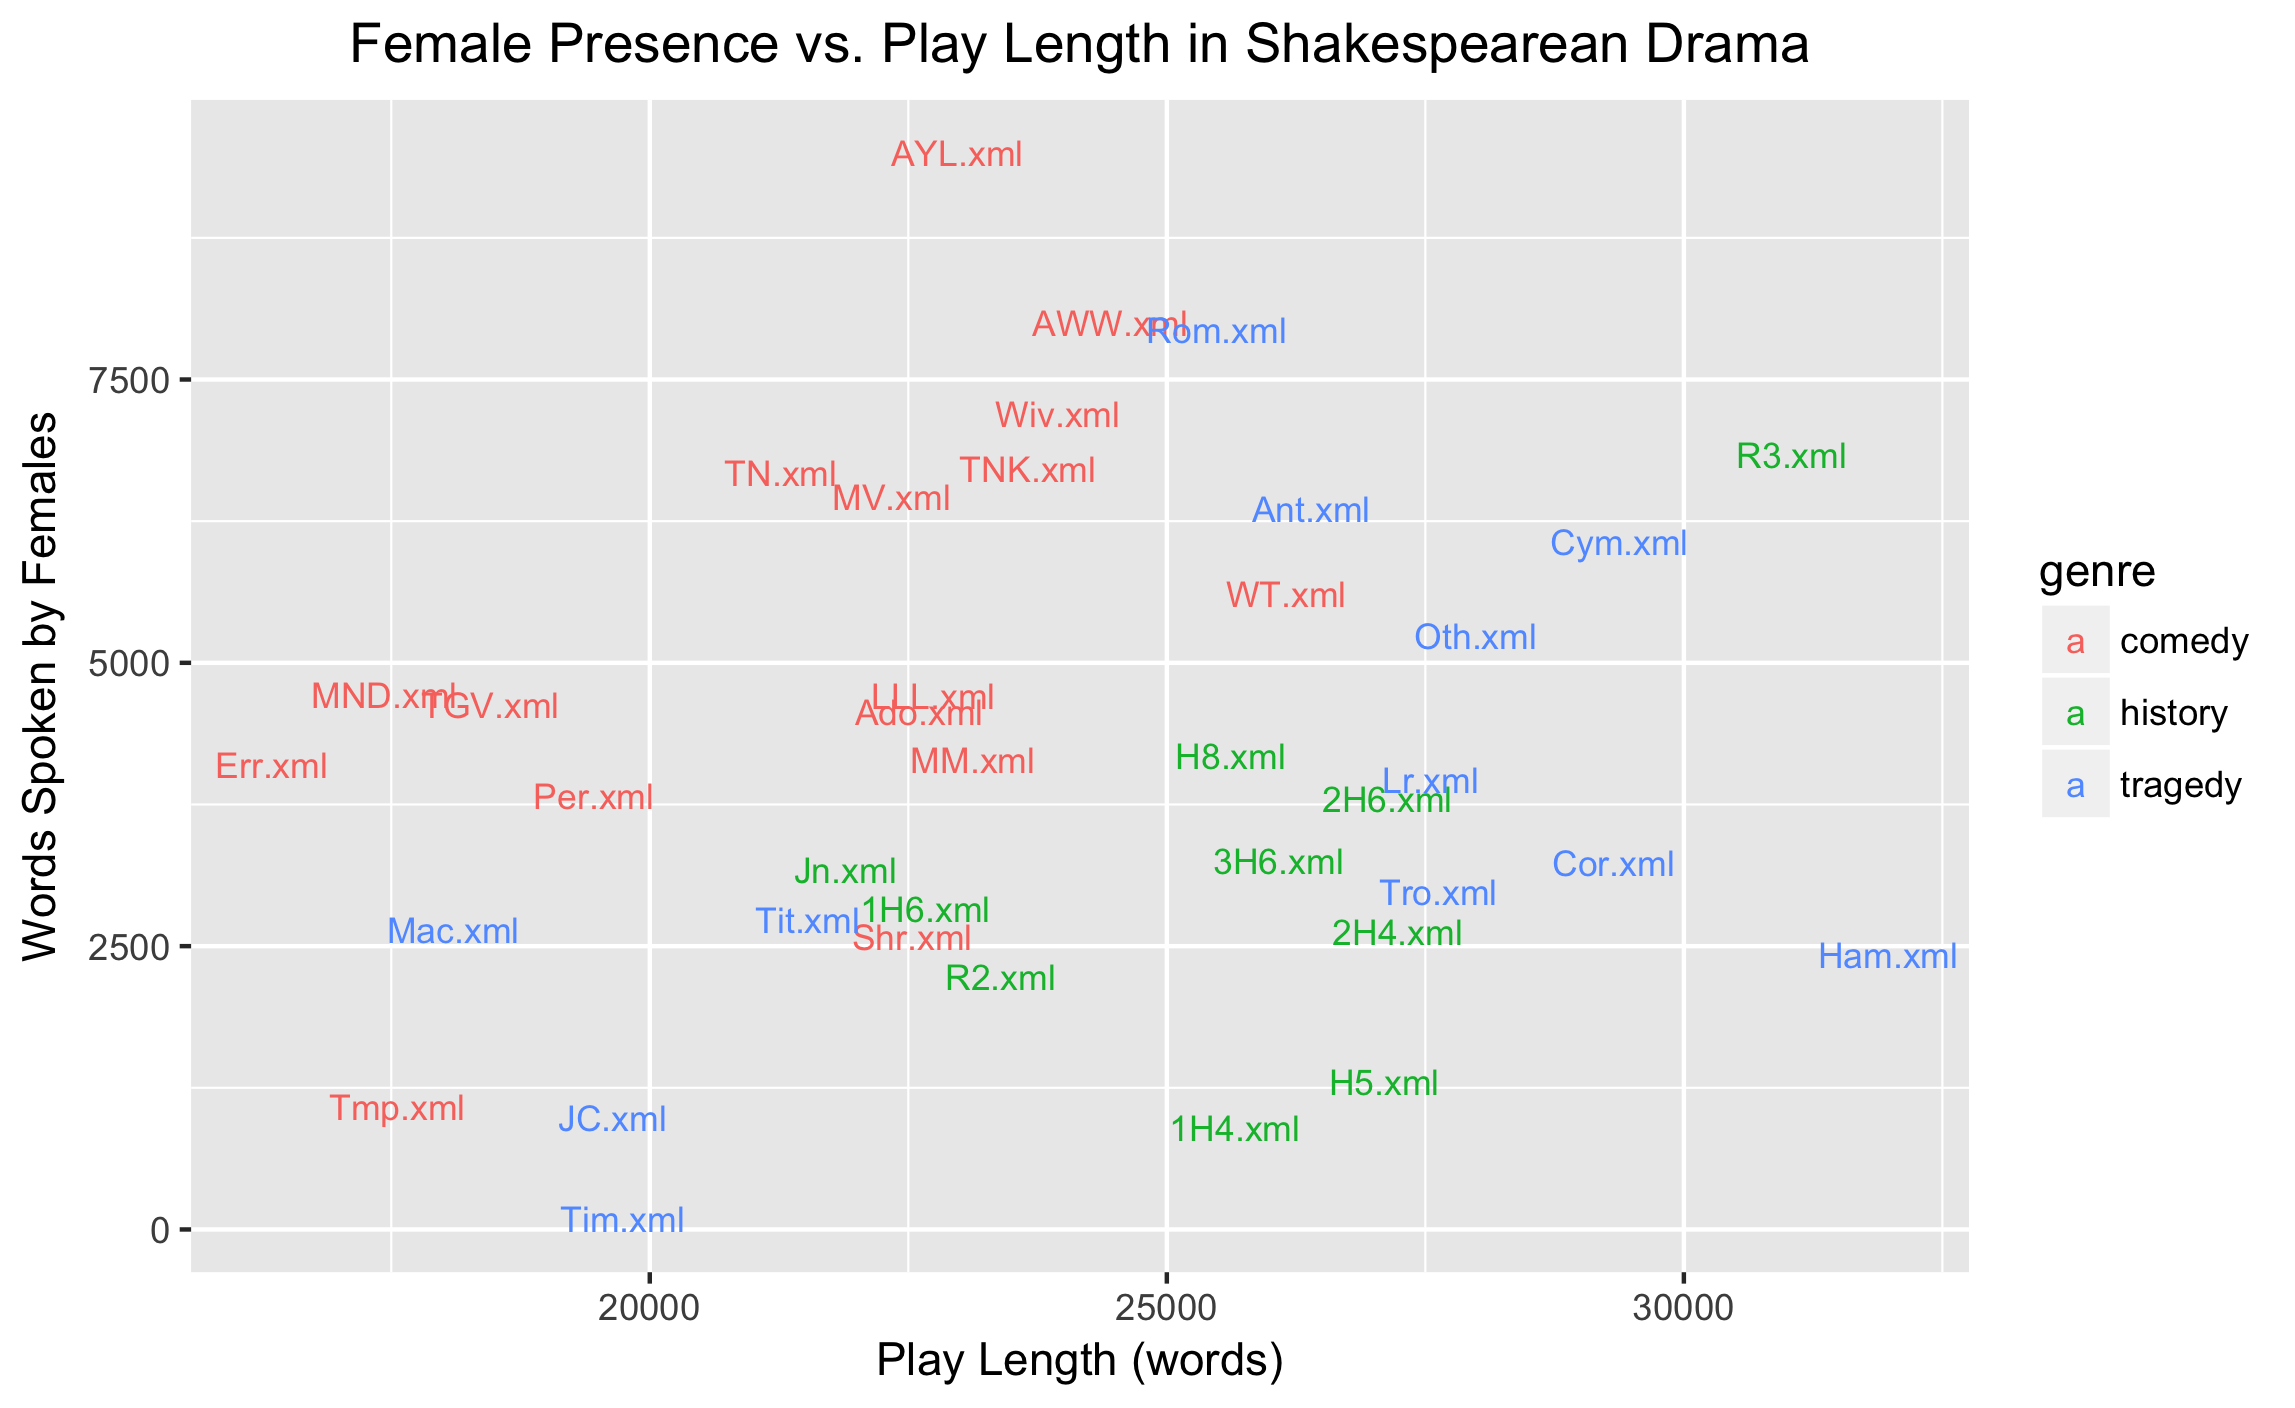 Visualization of the percent of lines spoken by women and play length of each Shakespearean play.